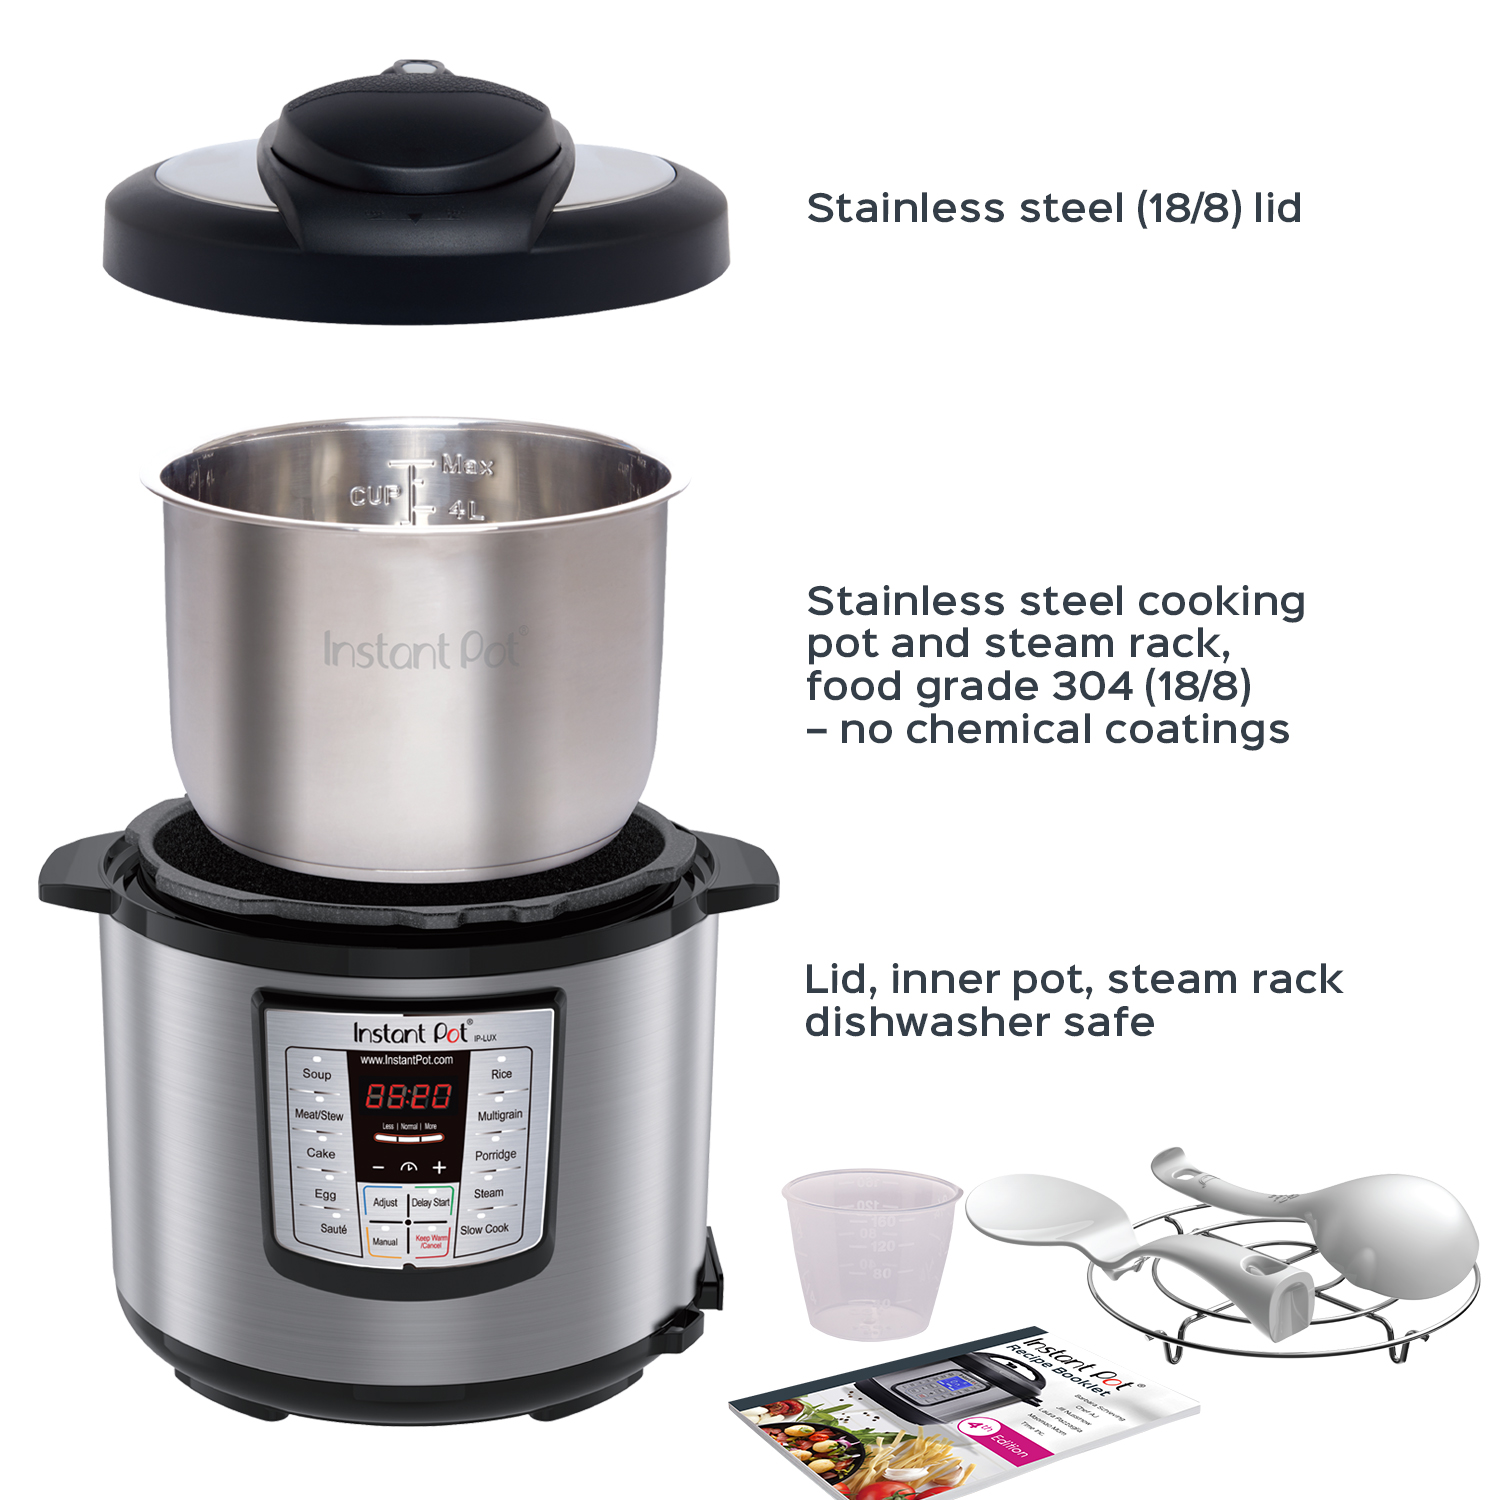 Instant Pot Stainless Steel Lux 5 Quart Multi-Use Programmable Pressure Cooker - image 4 of 5